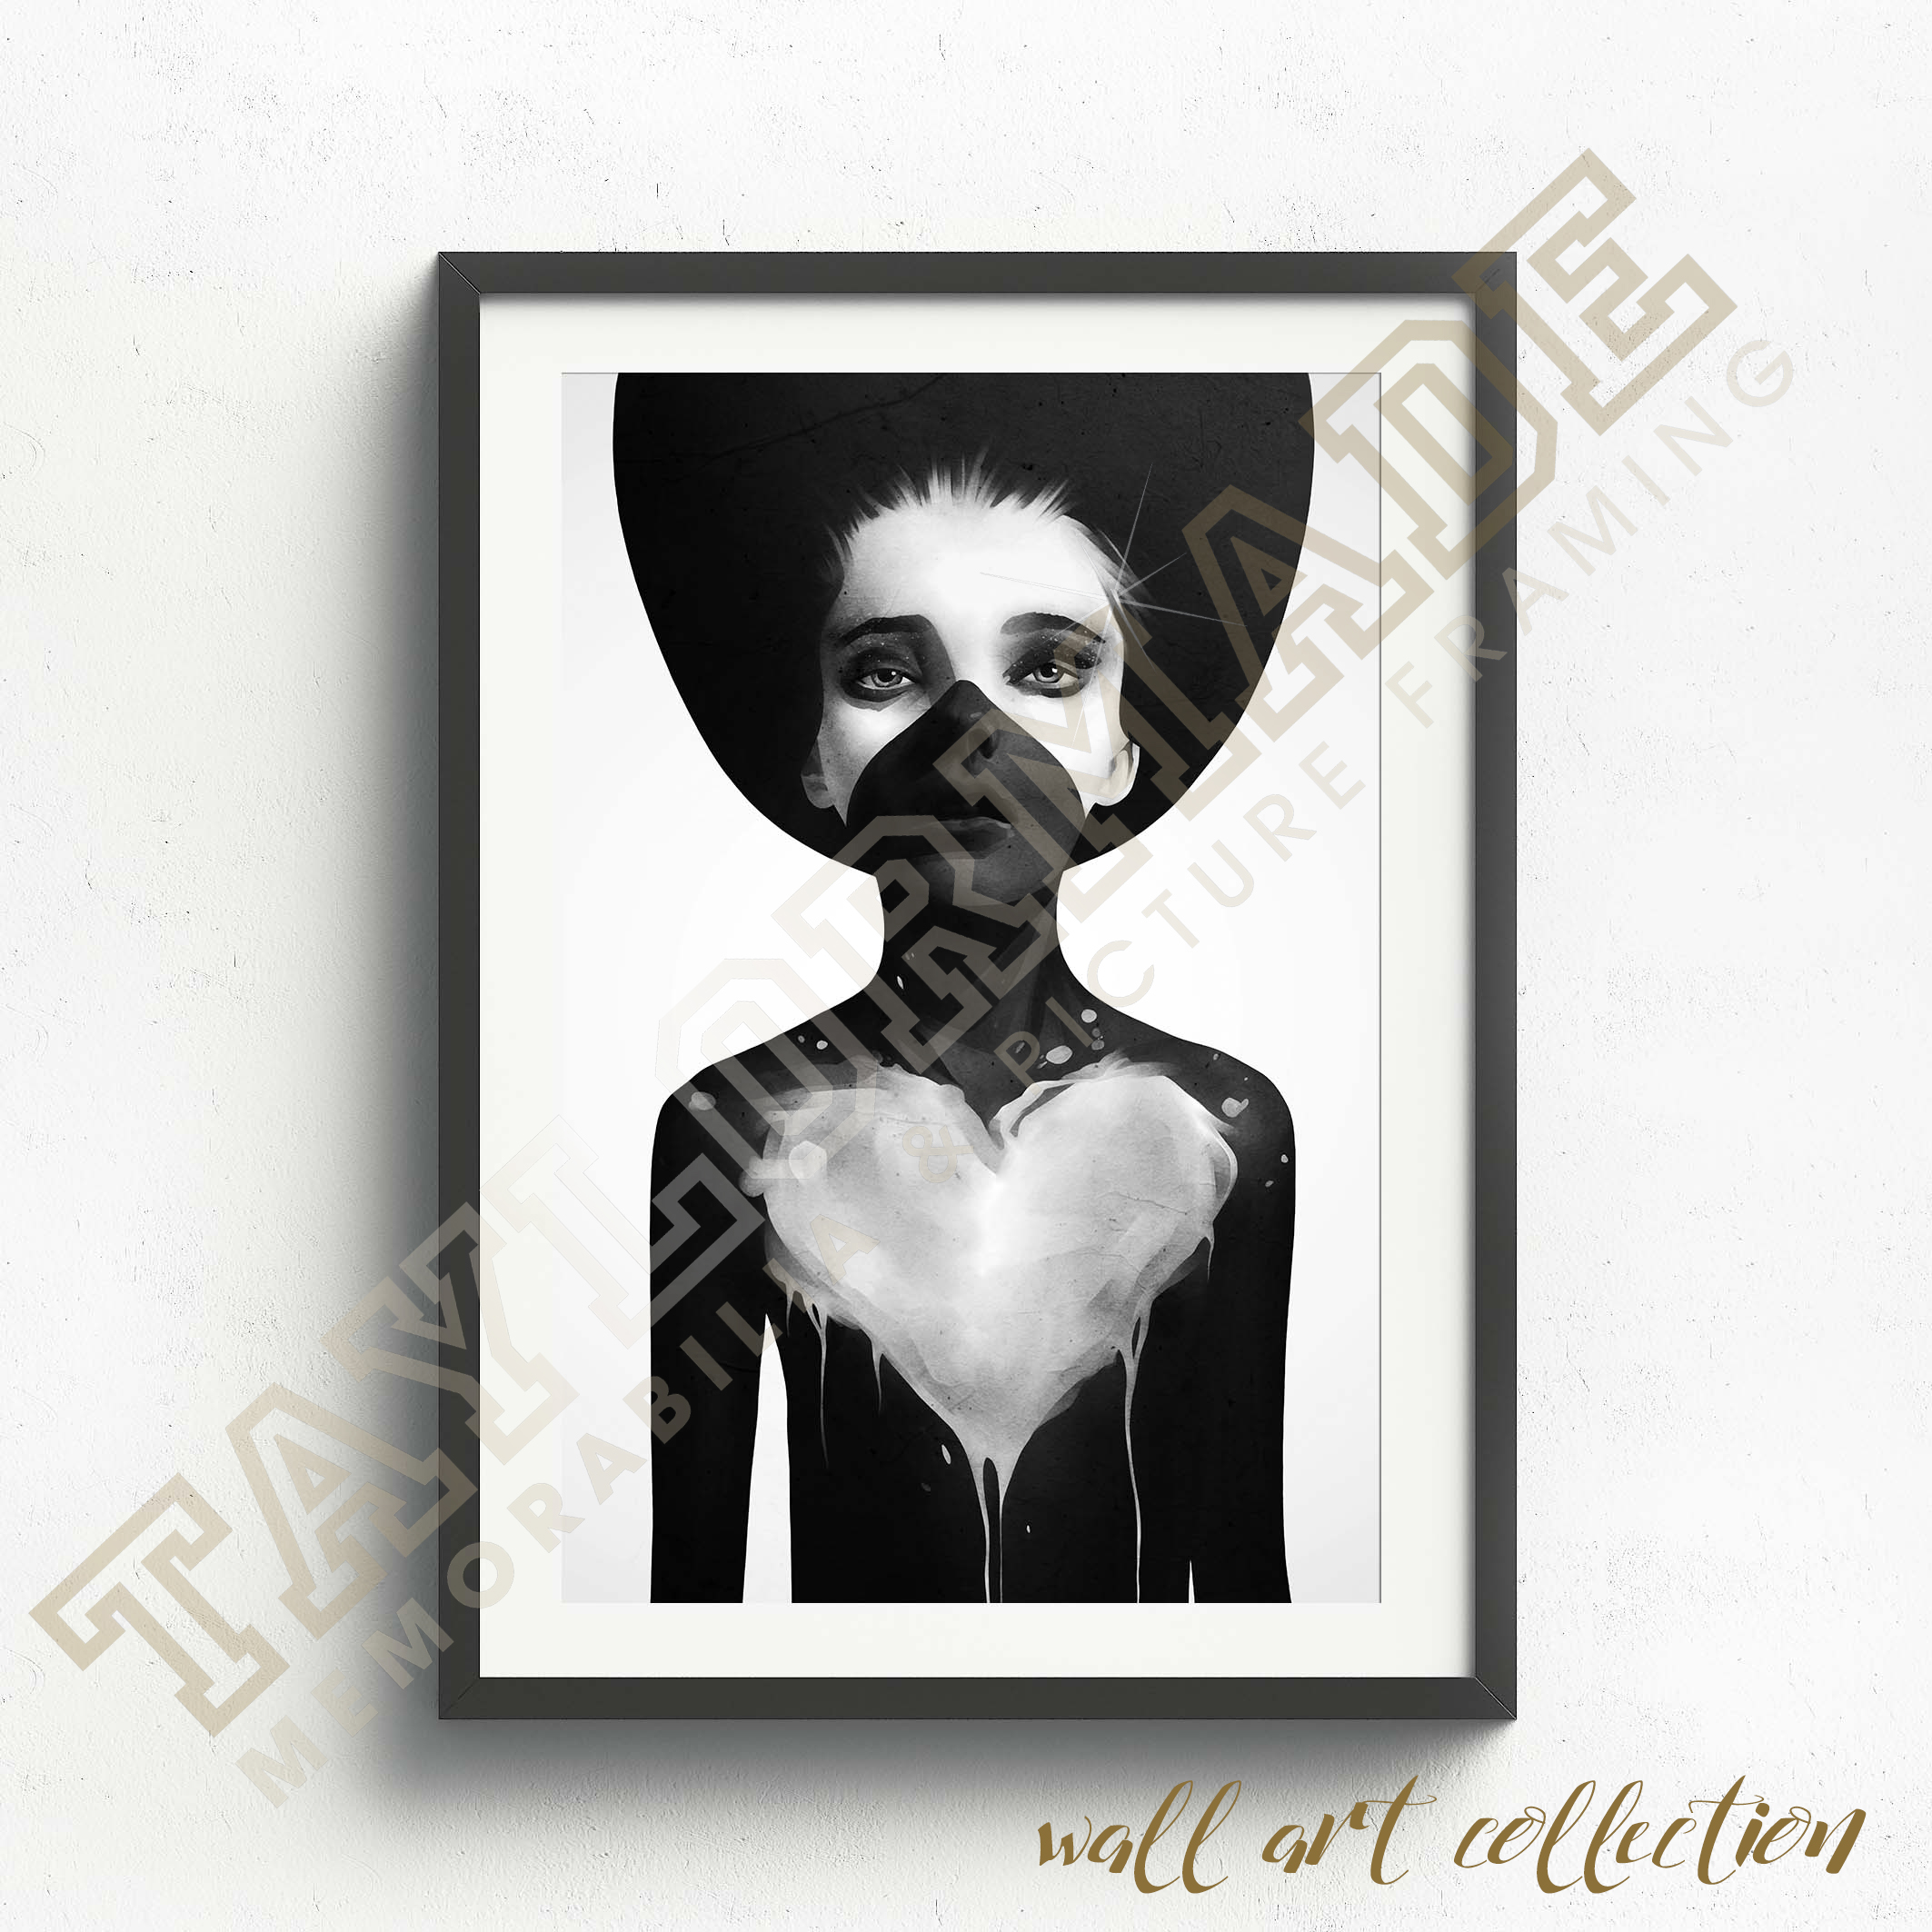 Wall Art Collection – Hold On